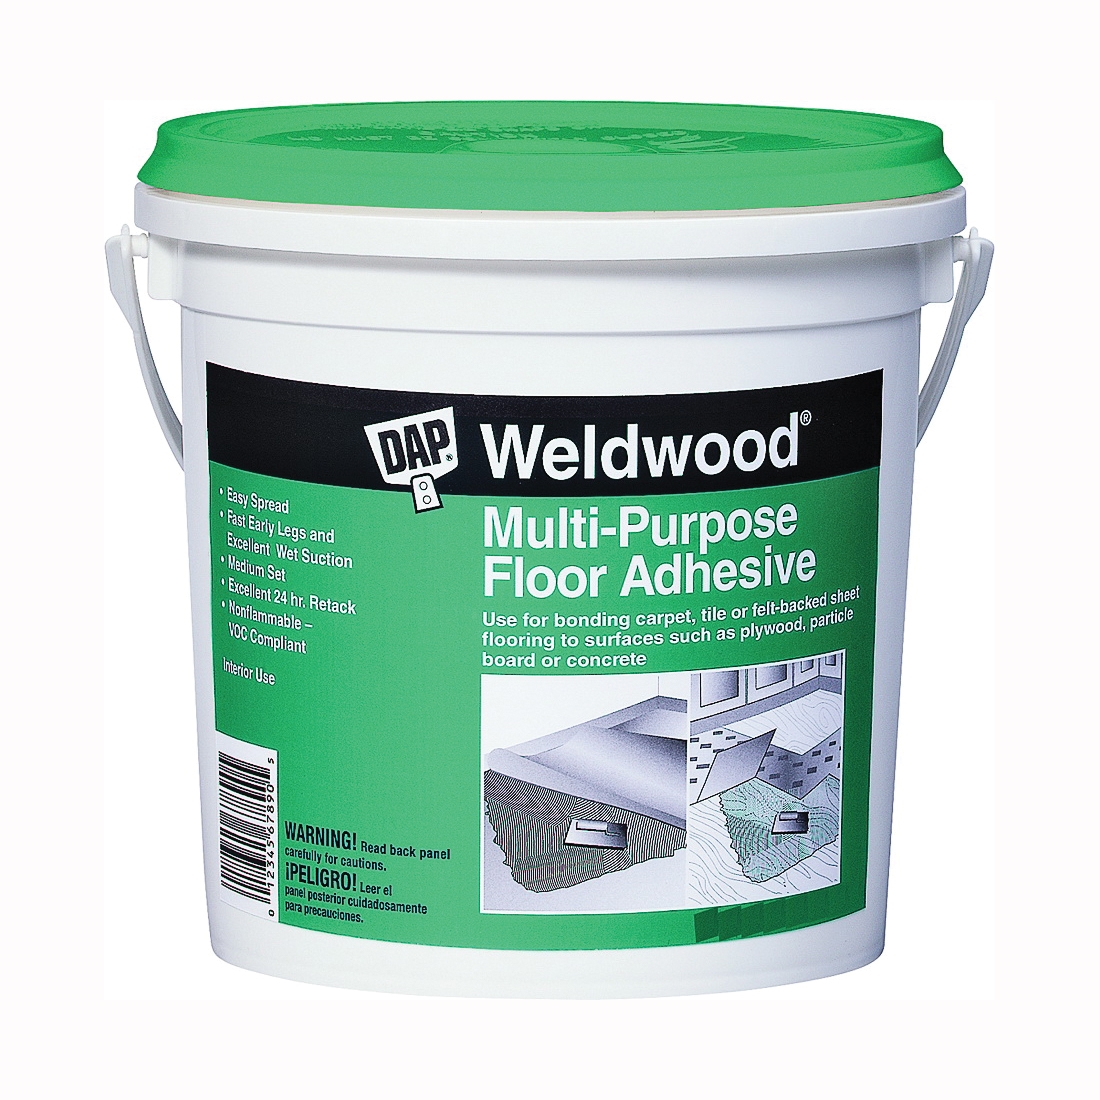 00144 Floor Adhesive, Off-White, 4 gal Pail